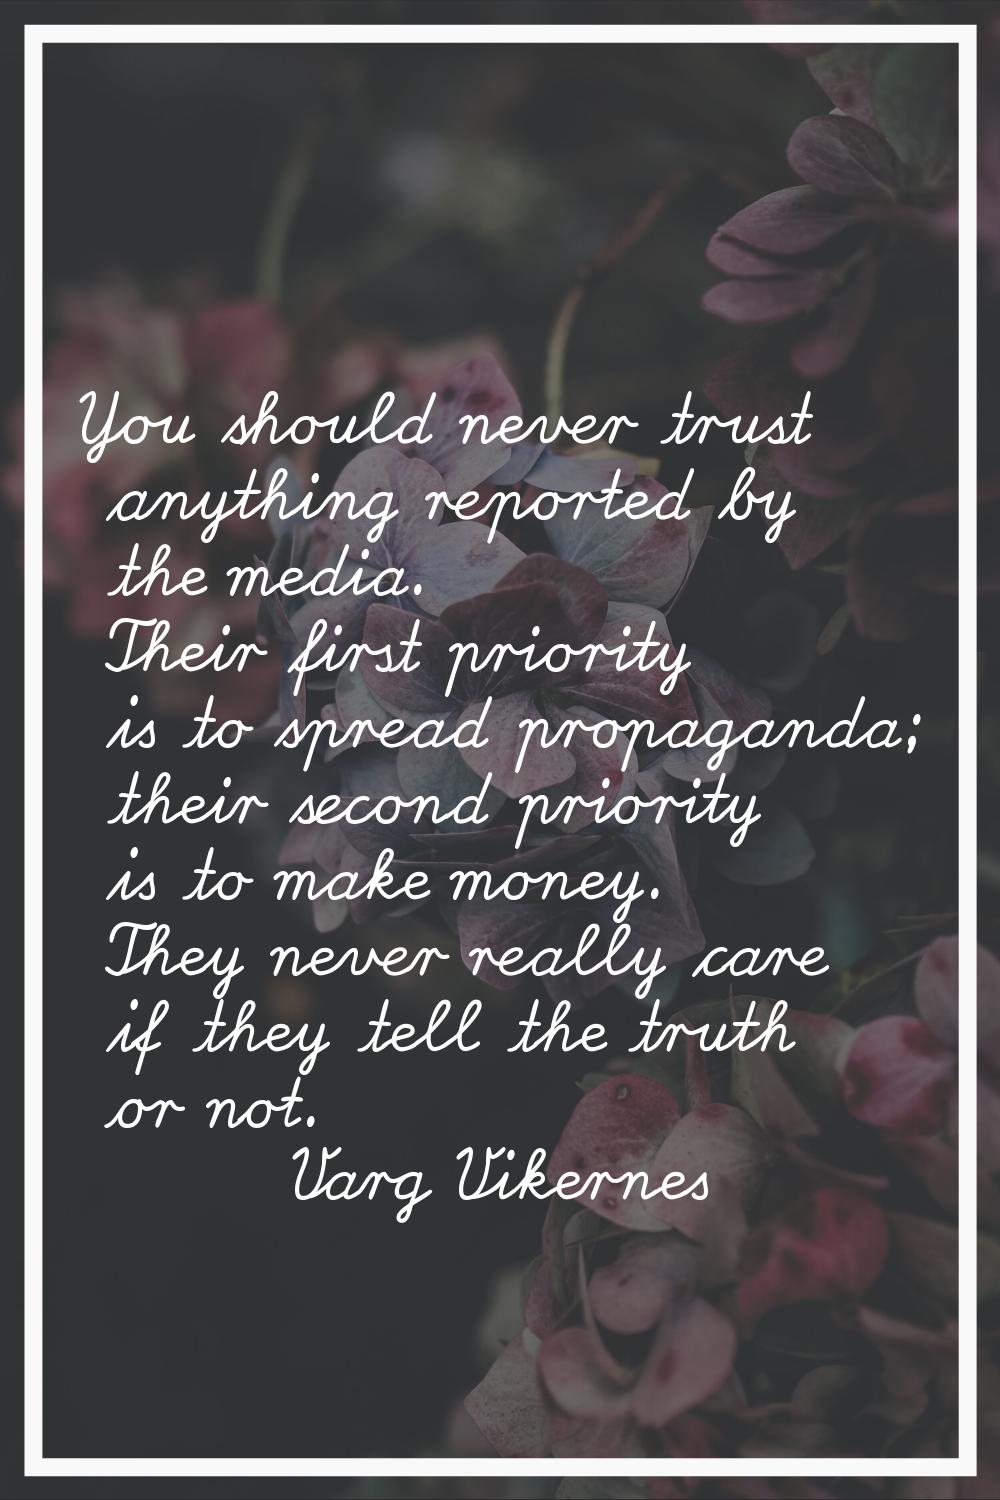 You should never trust anything reported by the media. Their first priority is to spread propaganda